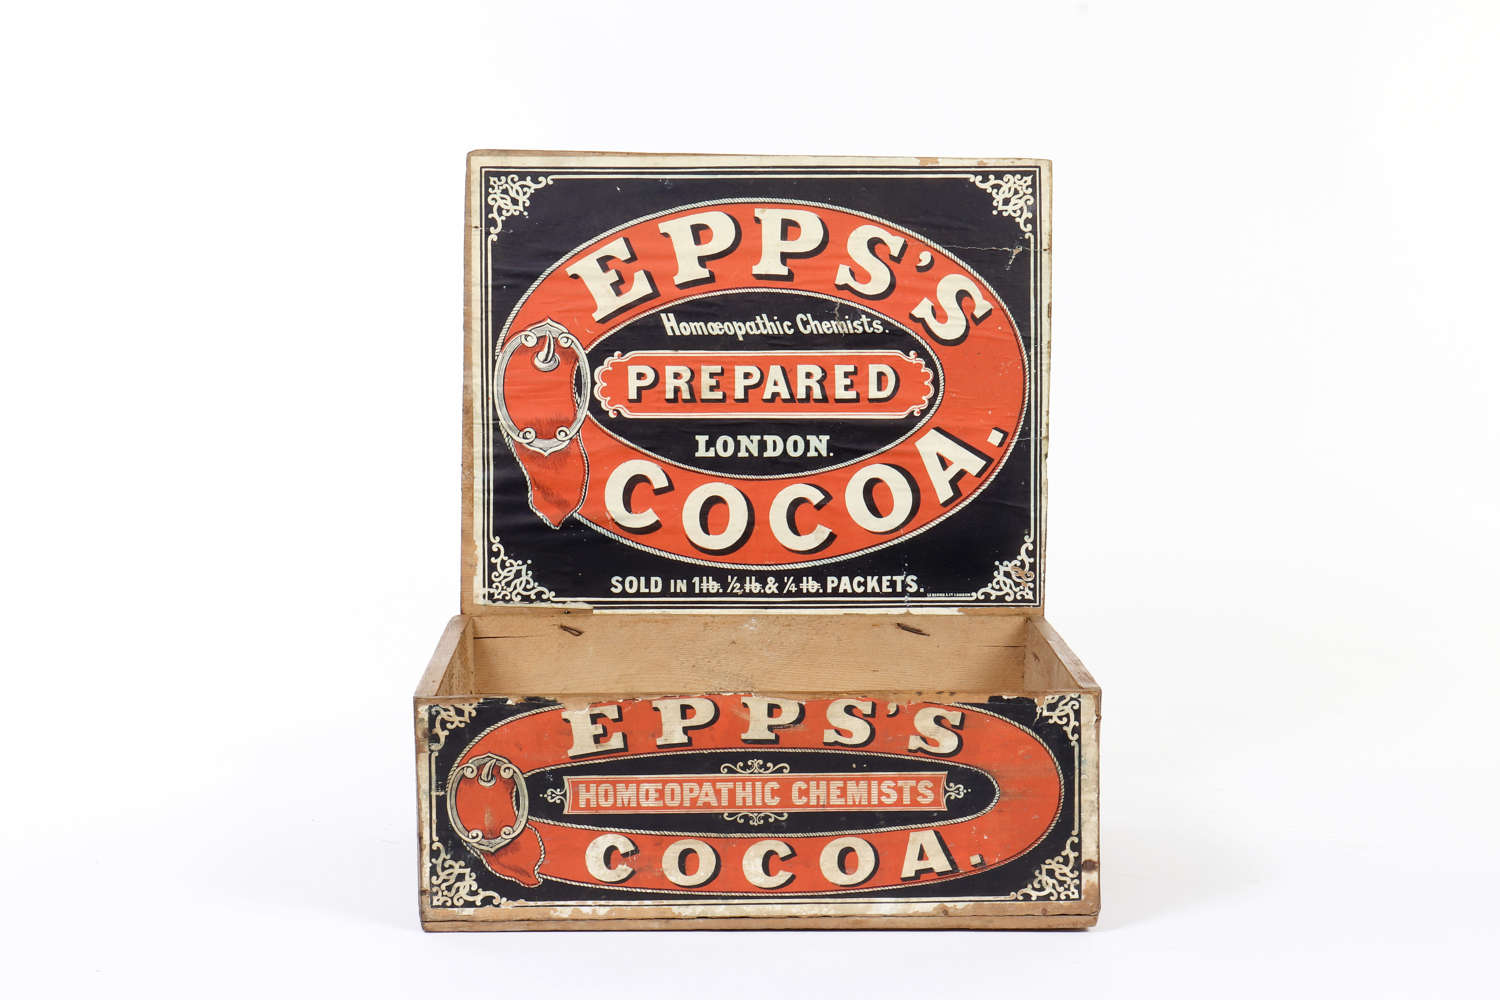 Epps's Cocoa shop delivery and display box